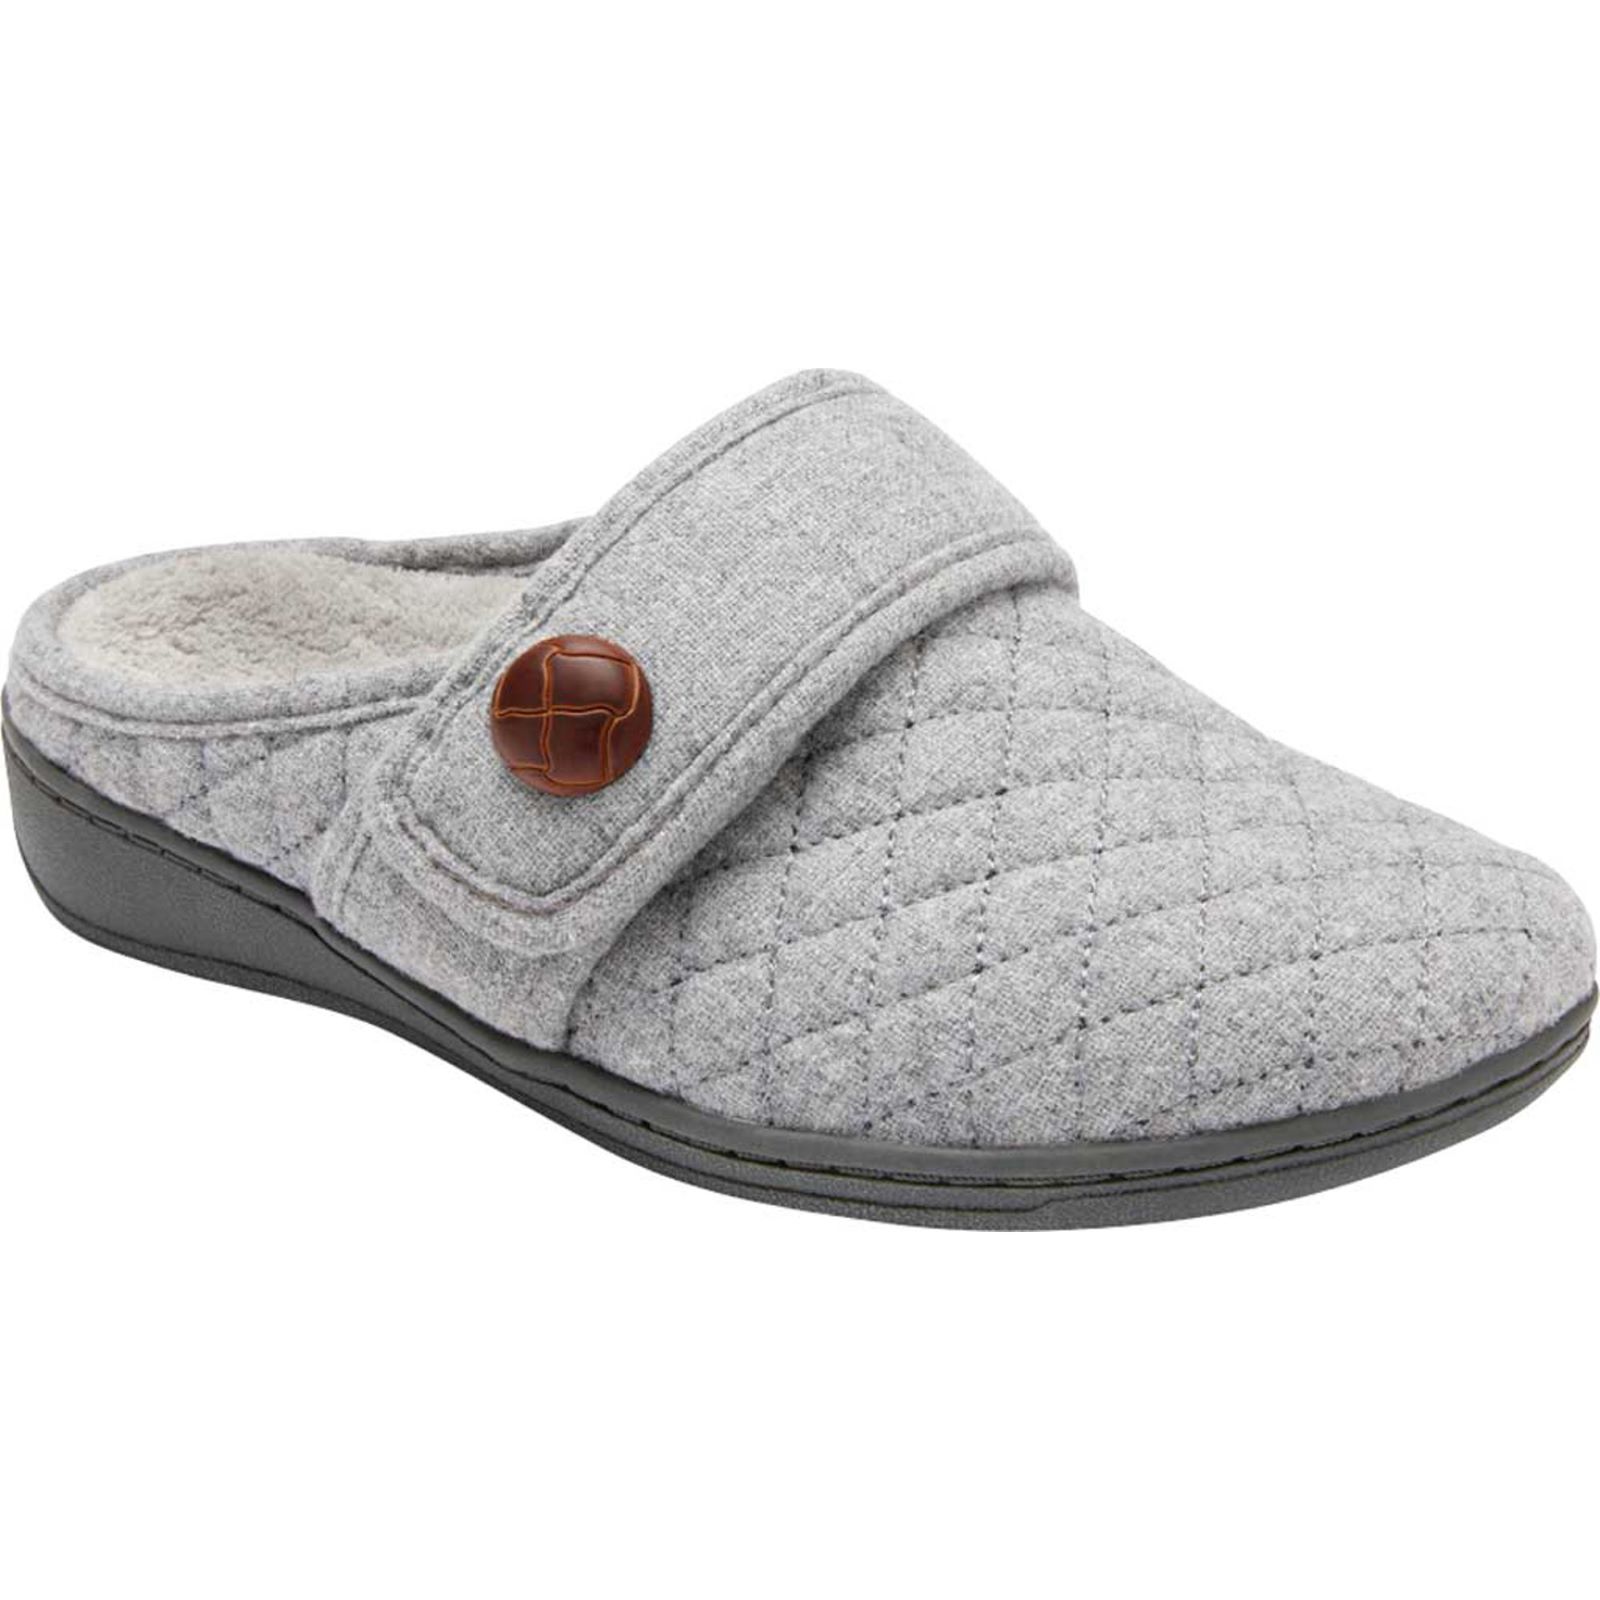 Carlin Supportive Slippers Light Grey